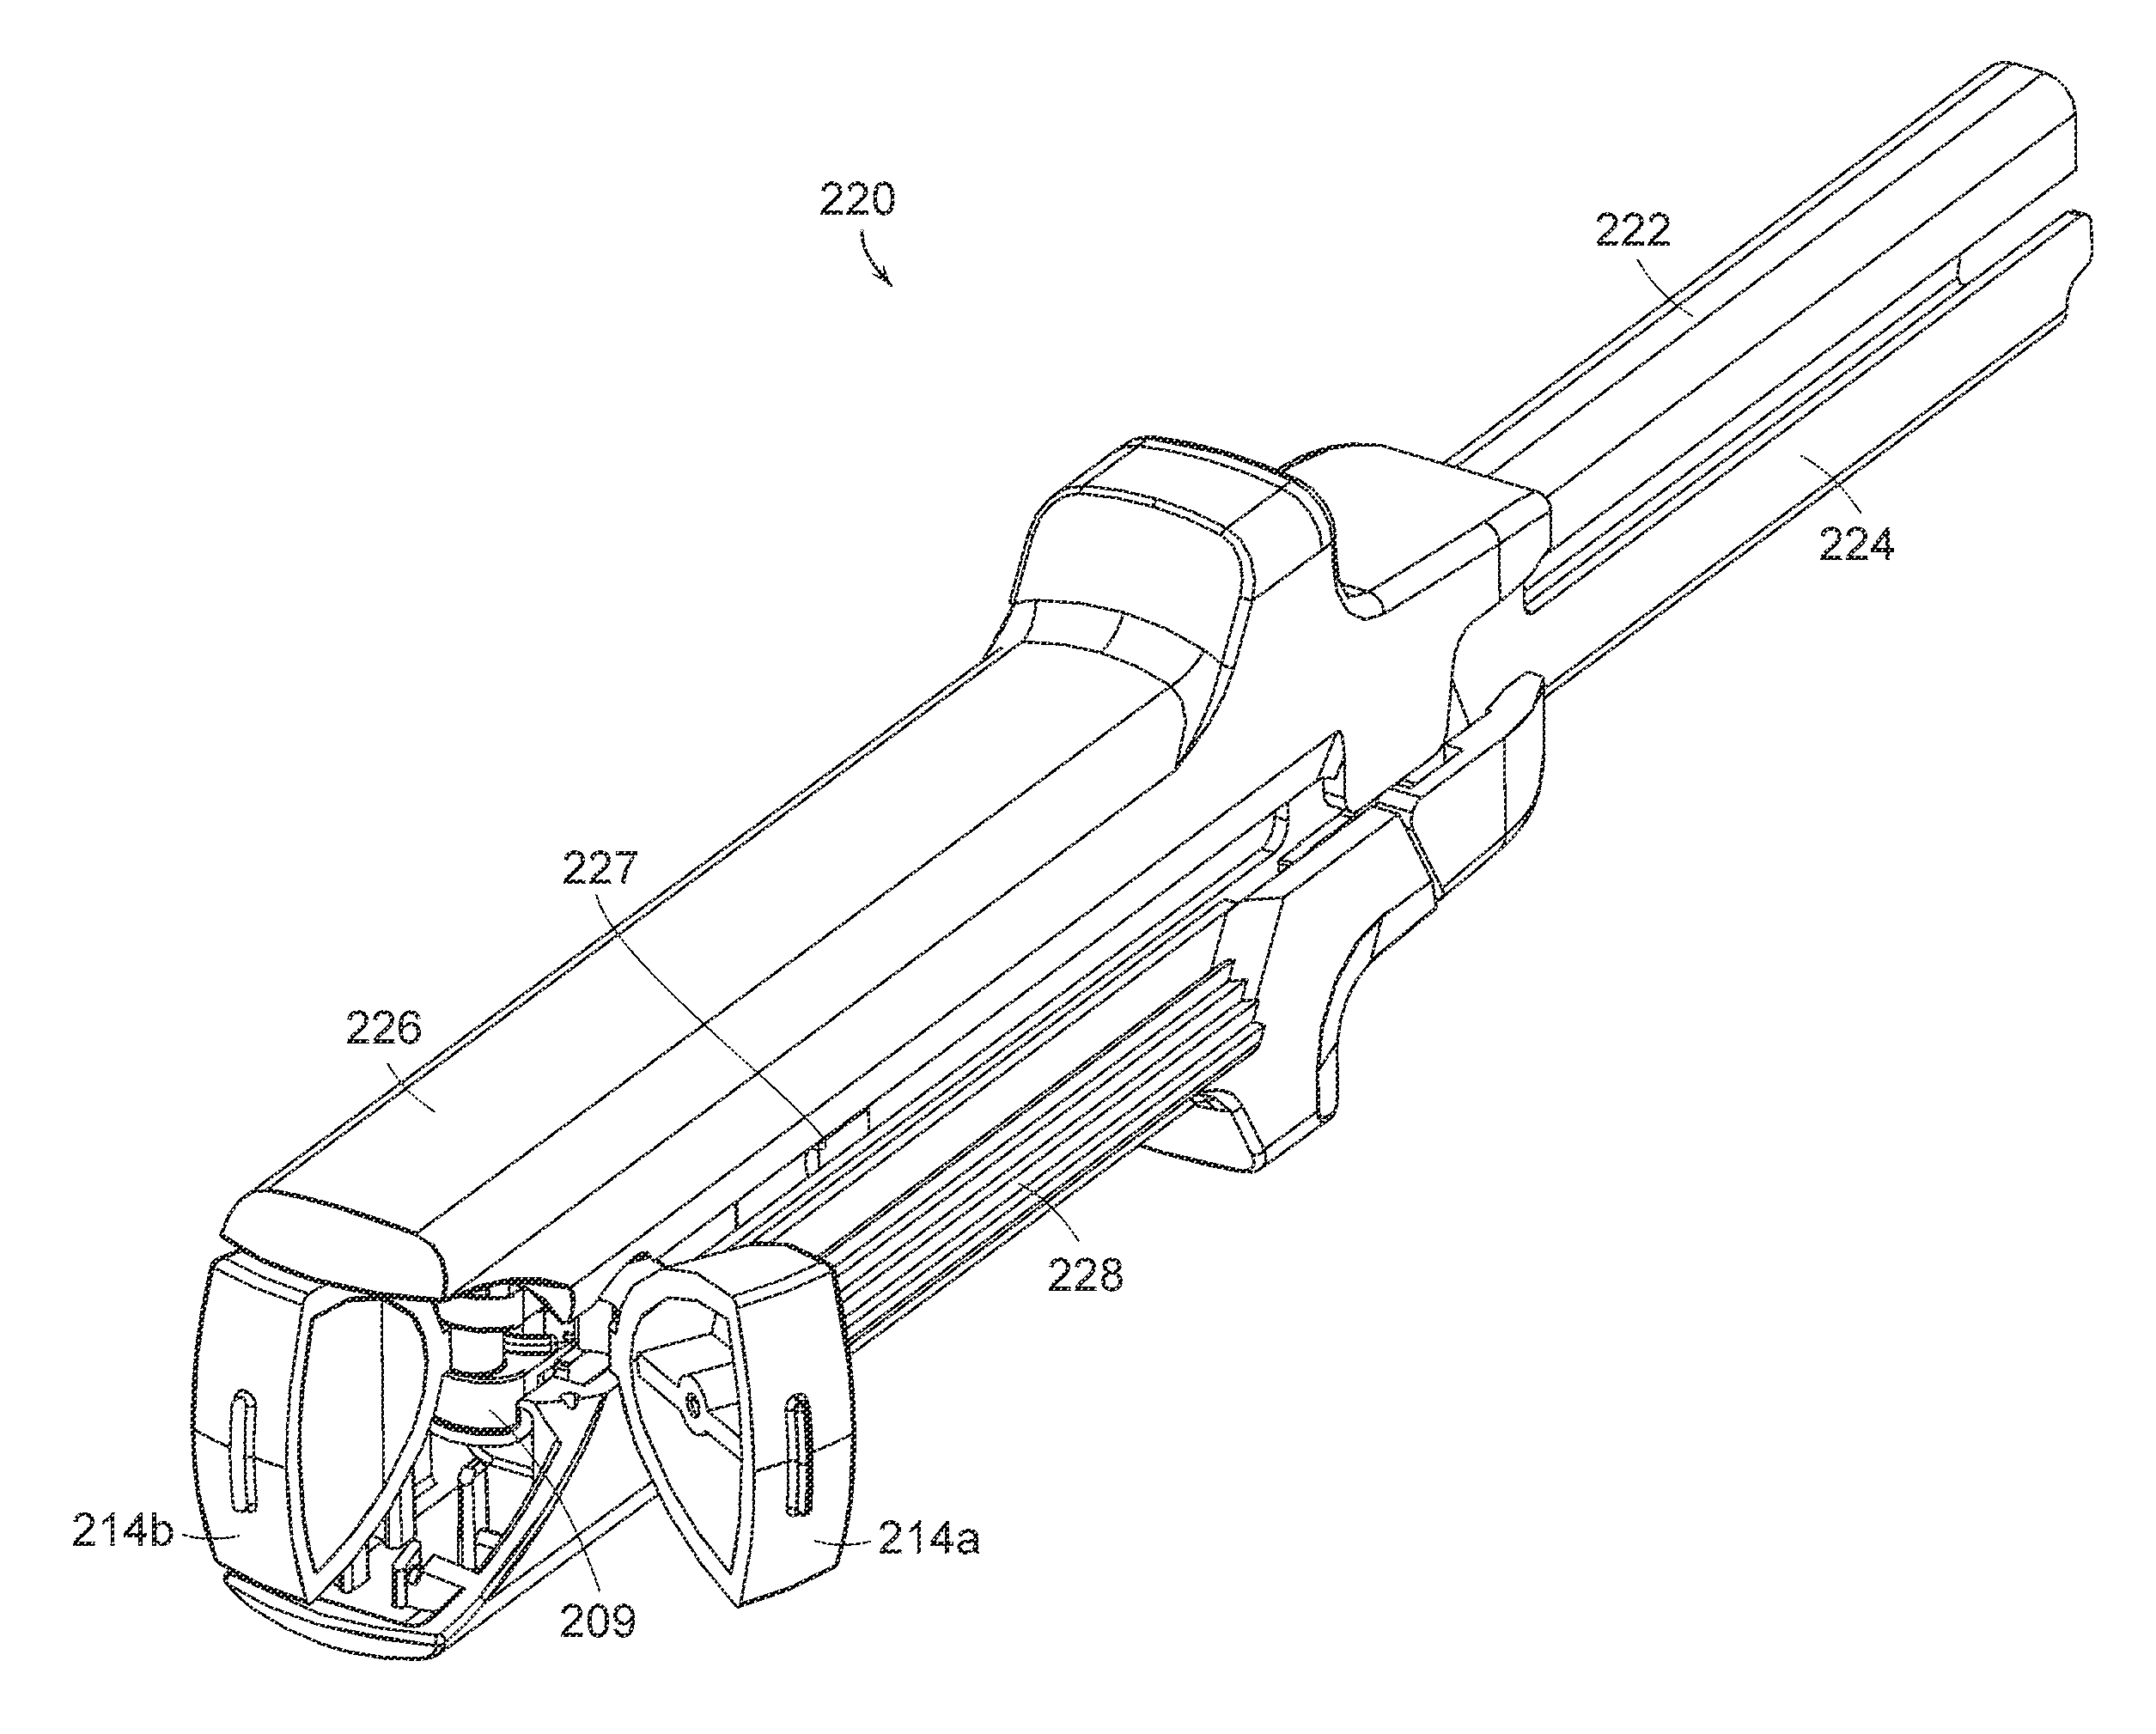 Surgical stapling instrument with improved firing trigger arrangement